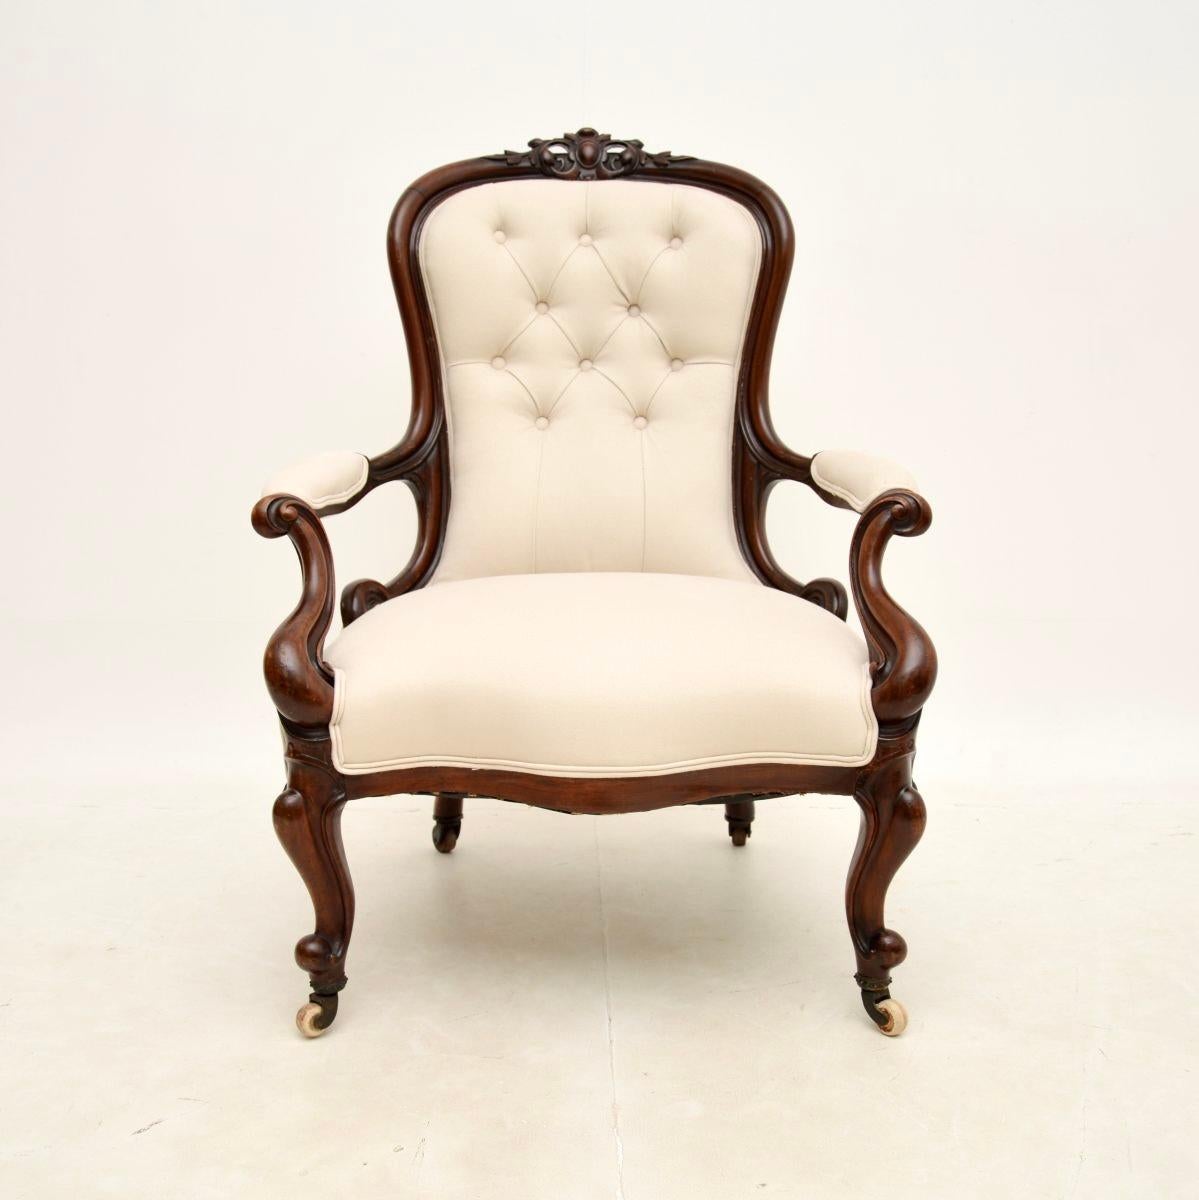 British Antique Victorian Spoon Back Armchair For Sale